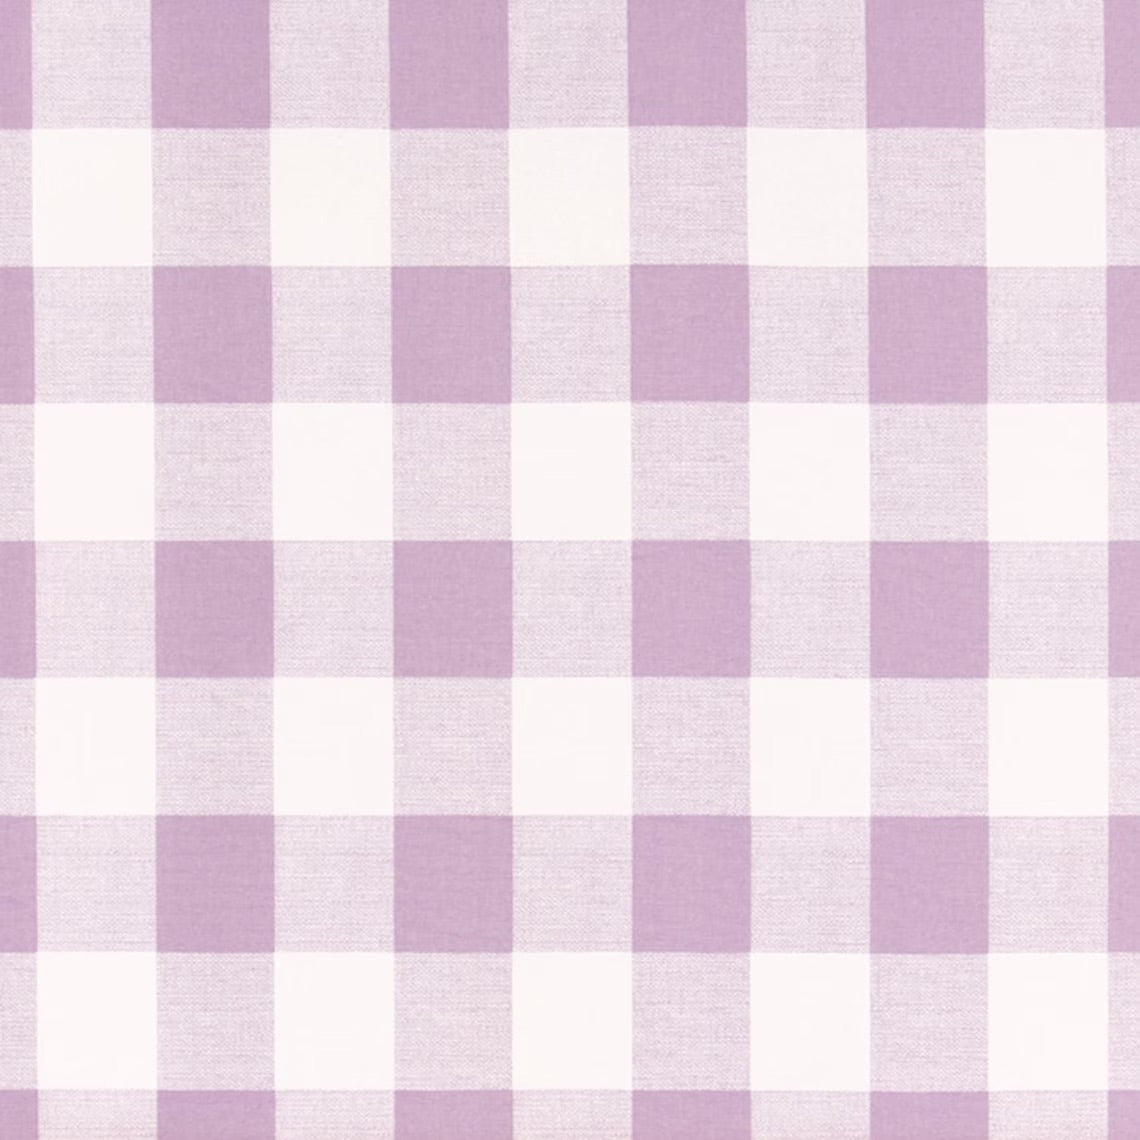 Tie-up Valance in Anderson Orchid Lavender Buffalo Check Plaid